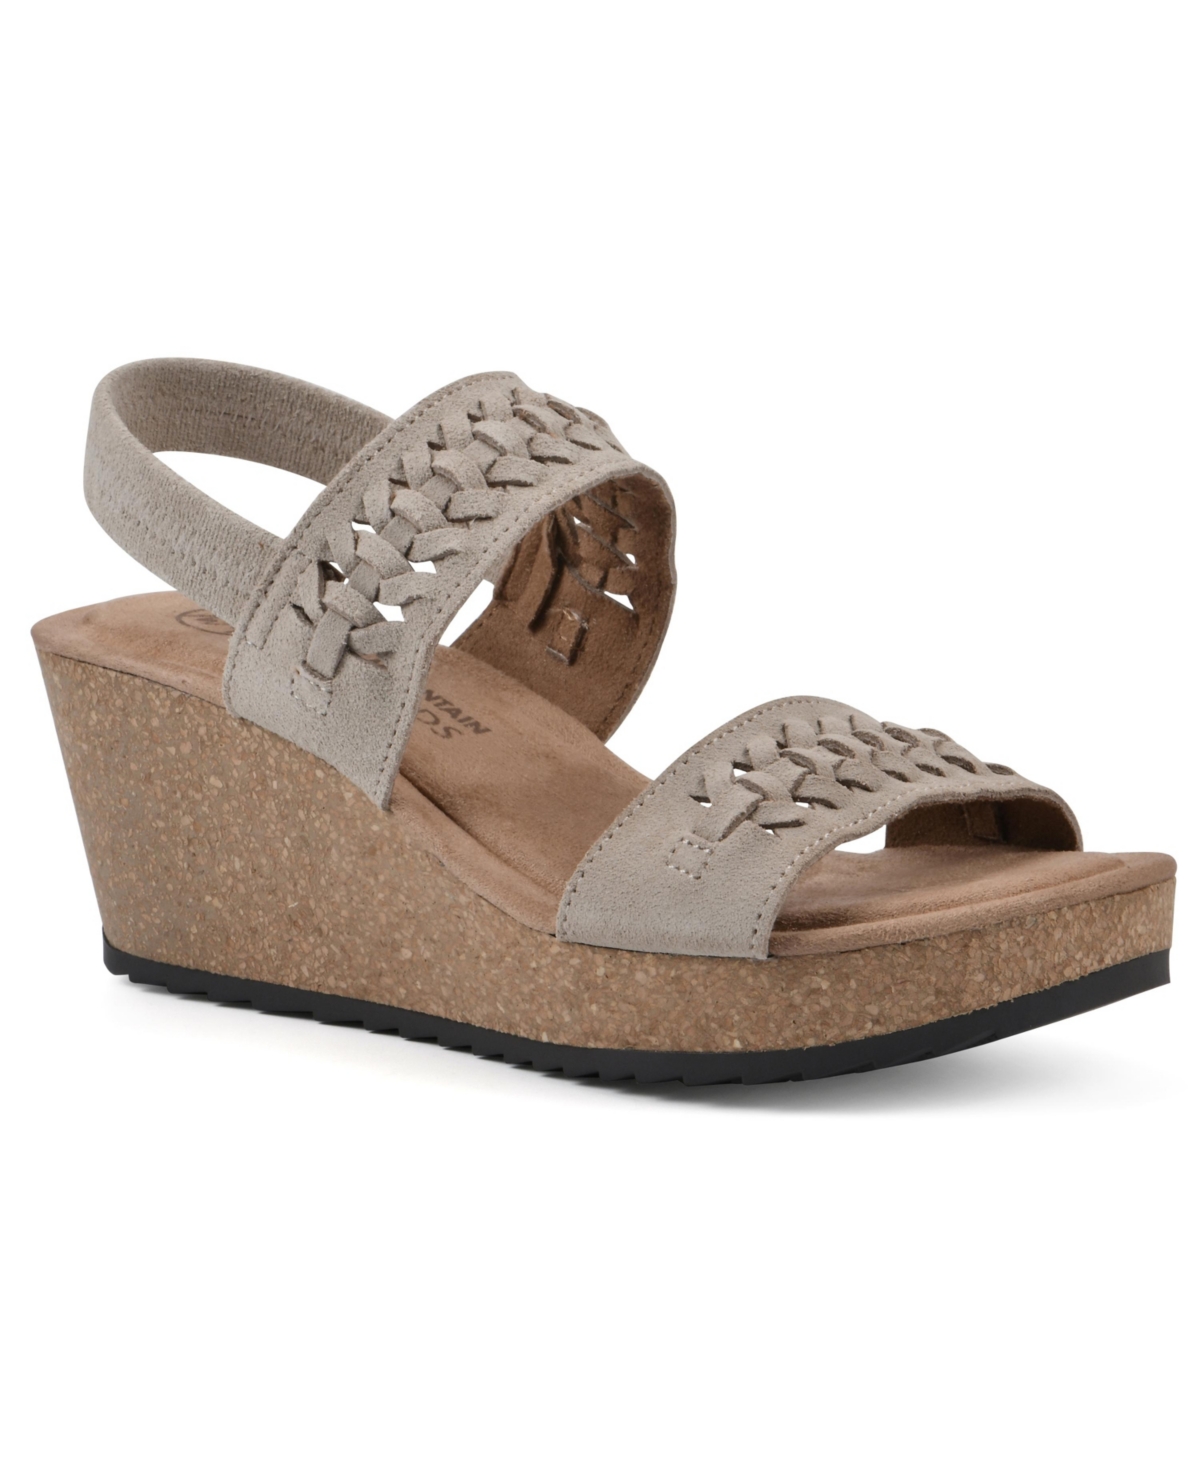 Women's Pretreat Footbed Wedge Sandals - Brown Leather